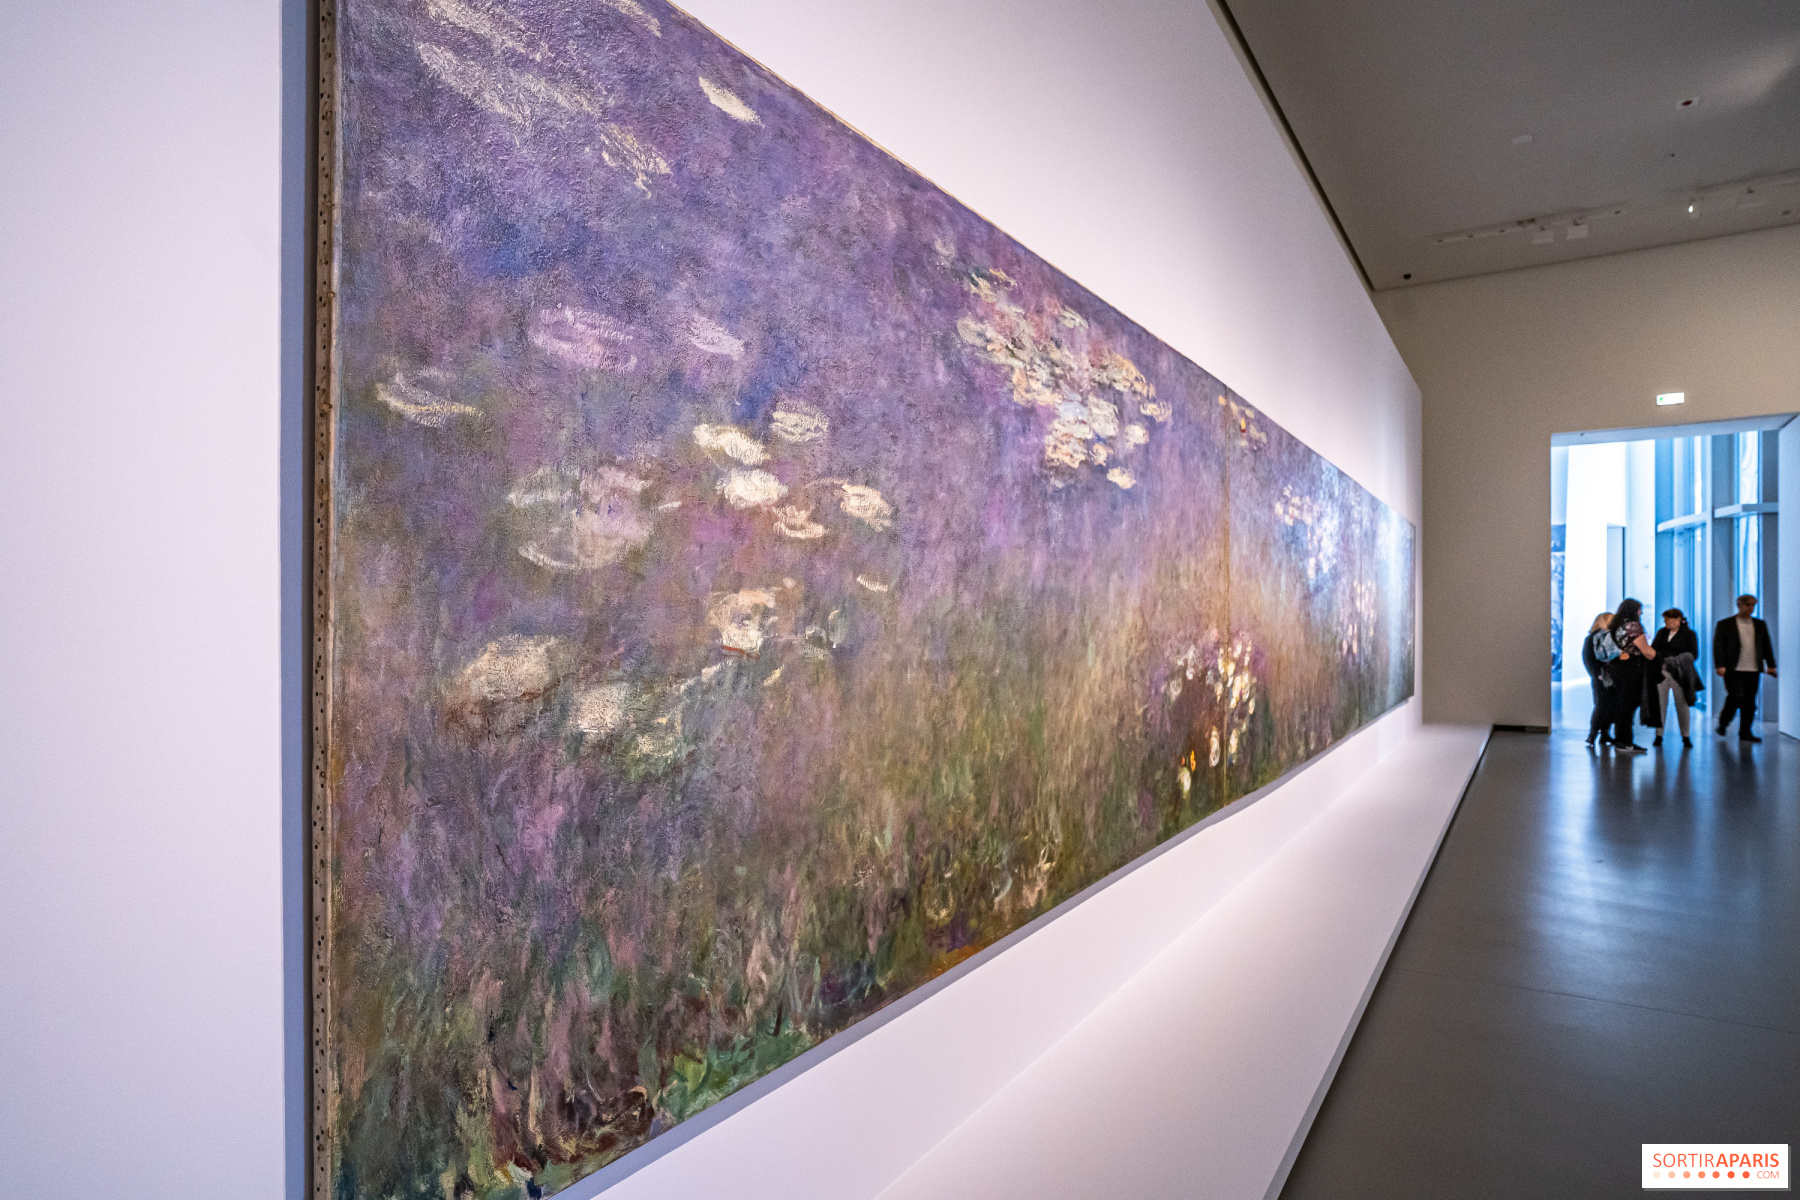 Monet-Mitchell, the fall event at the Fondation Louis Vuitton